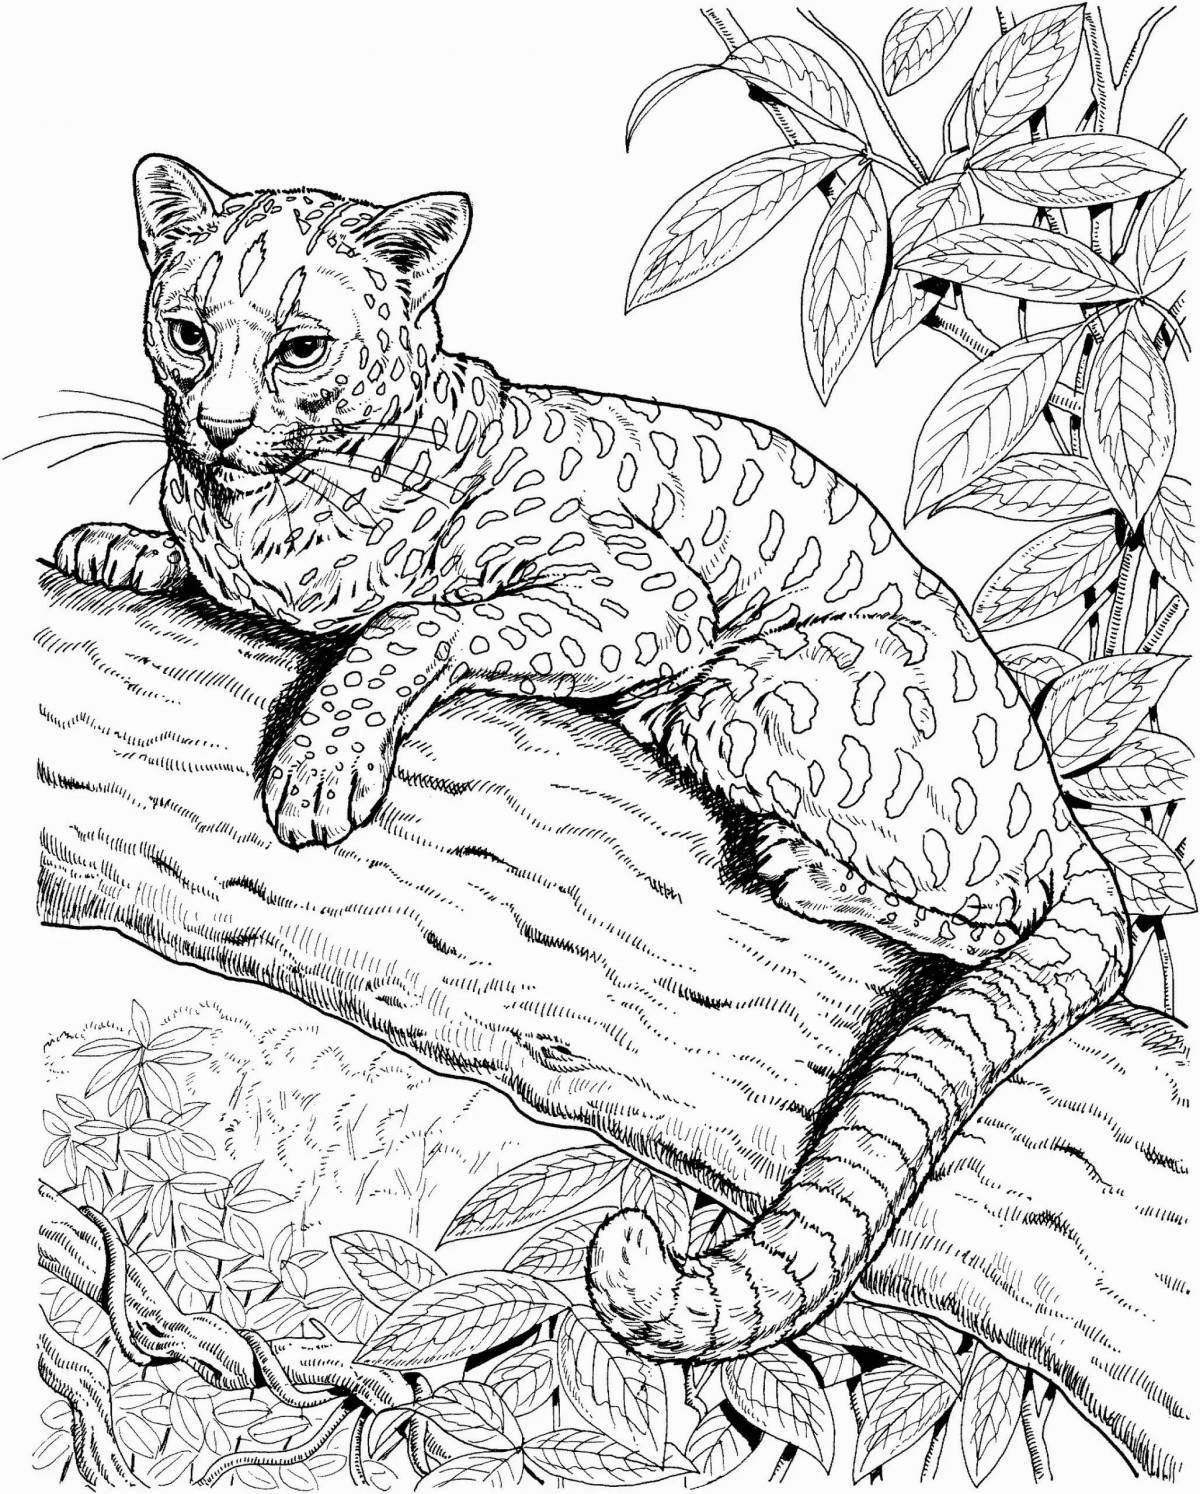 Exquisite amazing animal coloring page